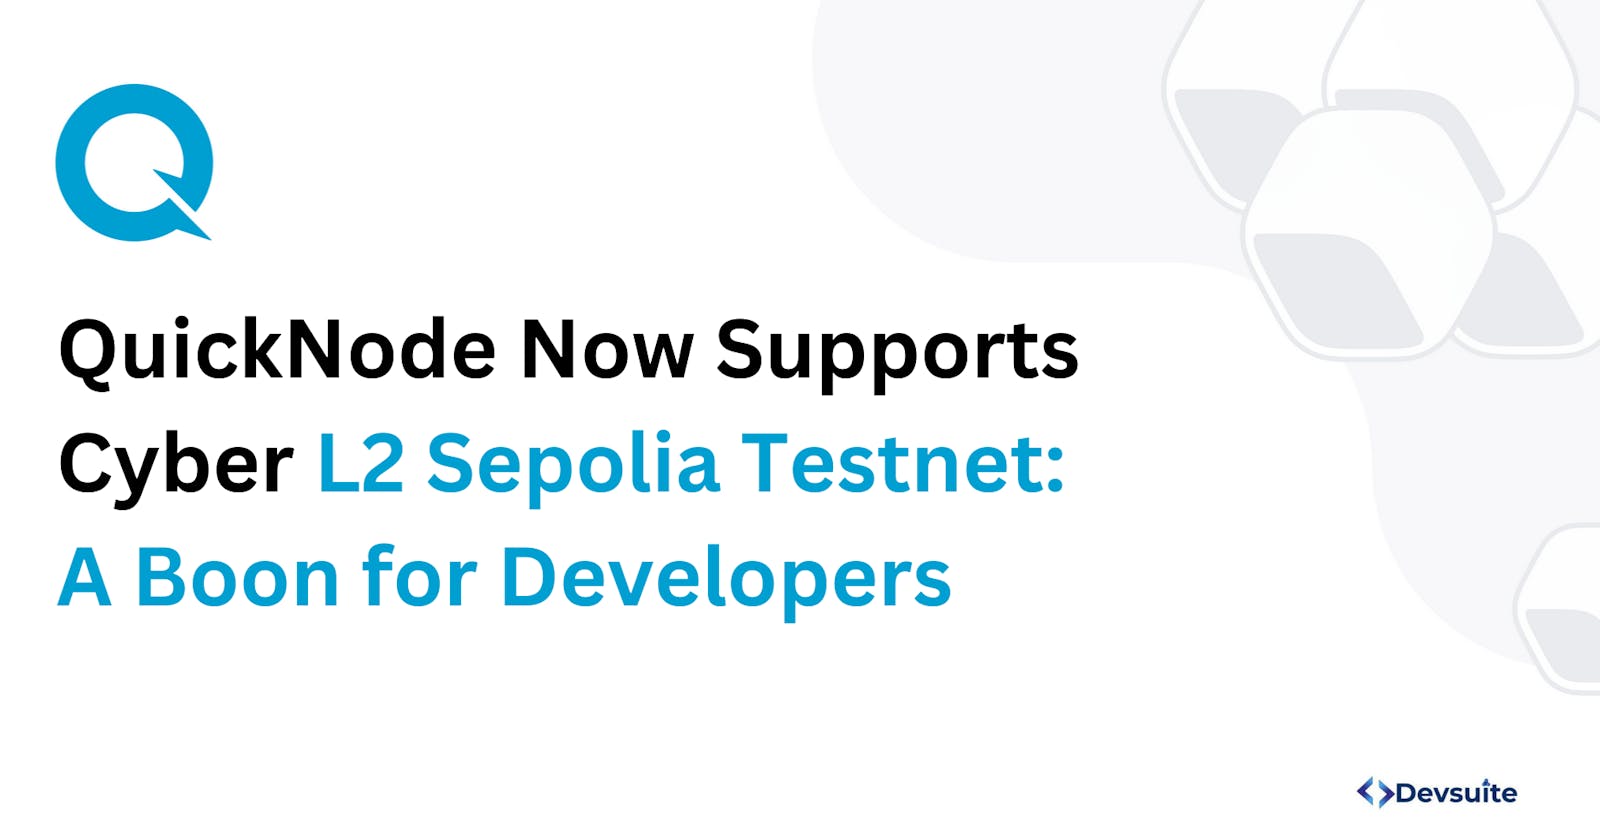 QuickNode Now Supports Cyber L2 Sepolia Testnet: A Boon for Developers